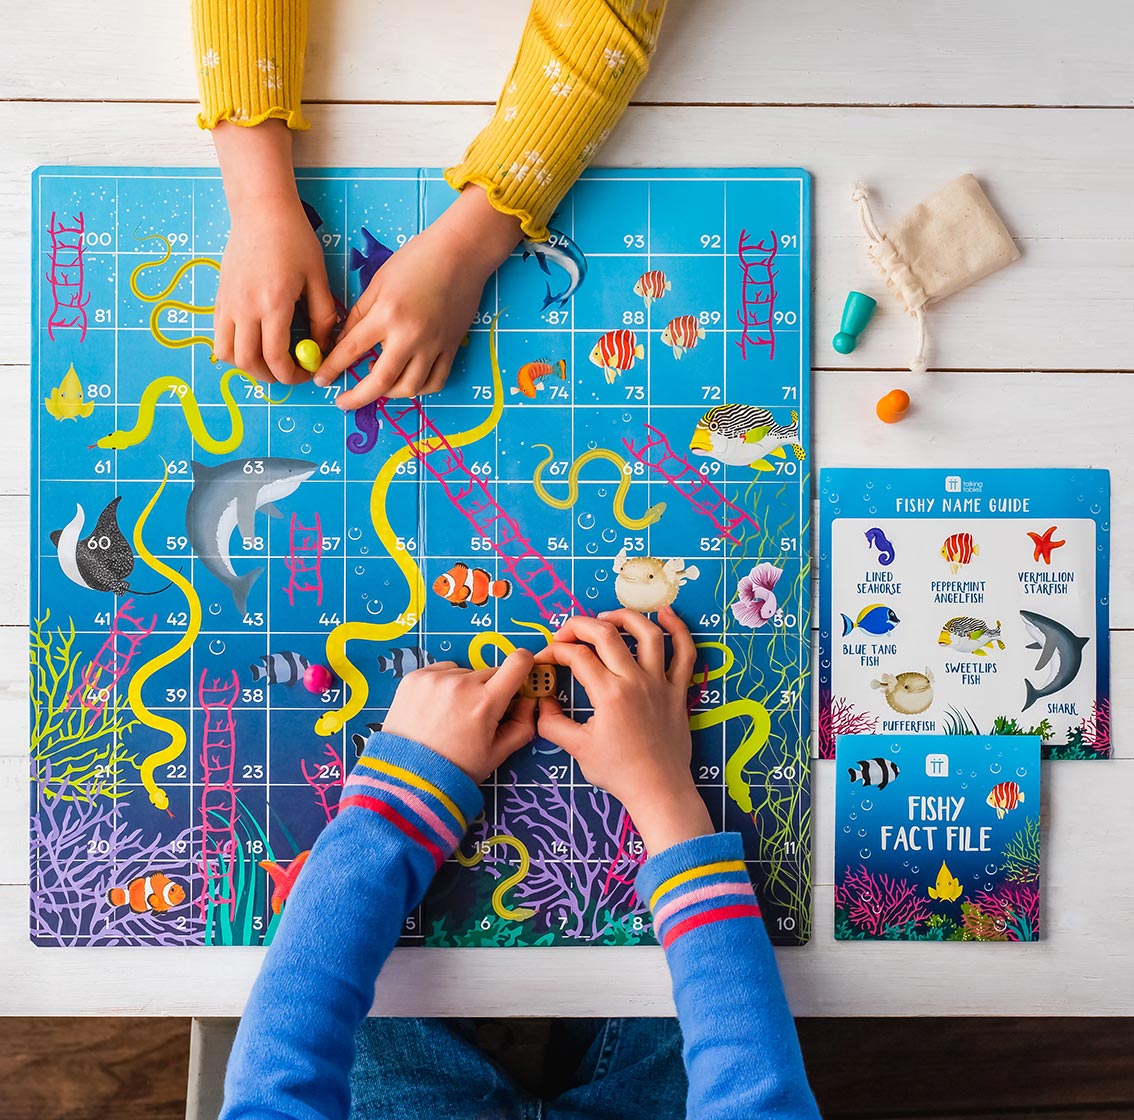 Fishy Snakes & Ladders